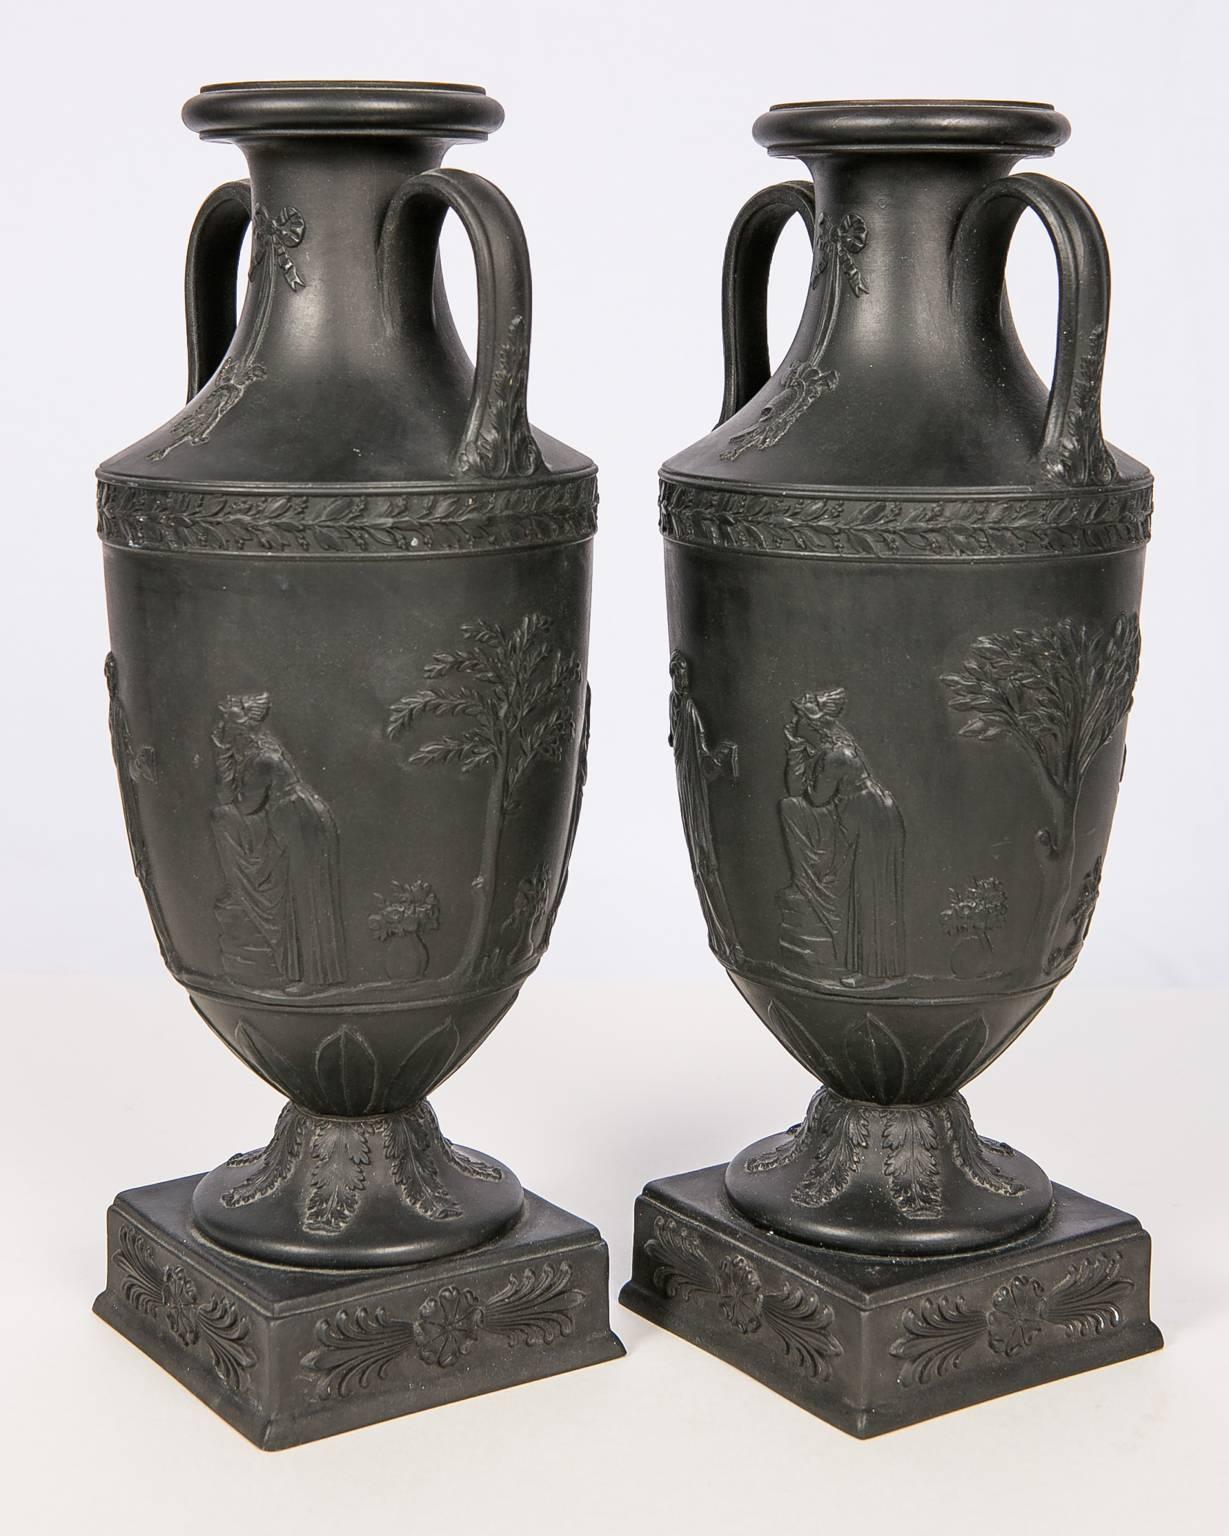 This pair of Wedgwood double handled mantel vases has a truly classical shape and decoration.
The expected Wedgwood molded design is finely executed. Around the center of the vases we see figures in relief wearing classical dress. Below the figures